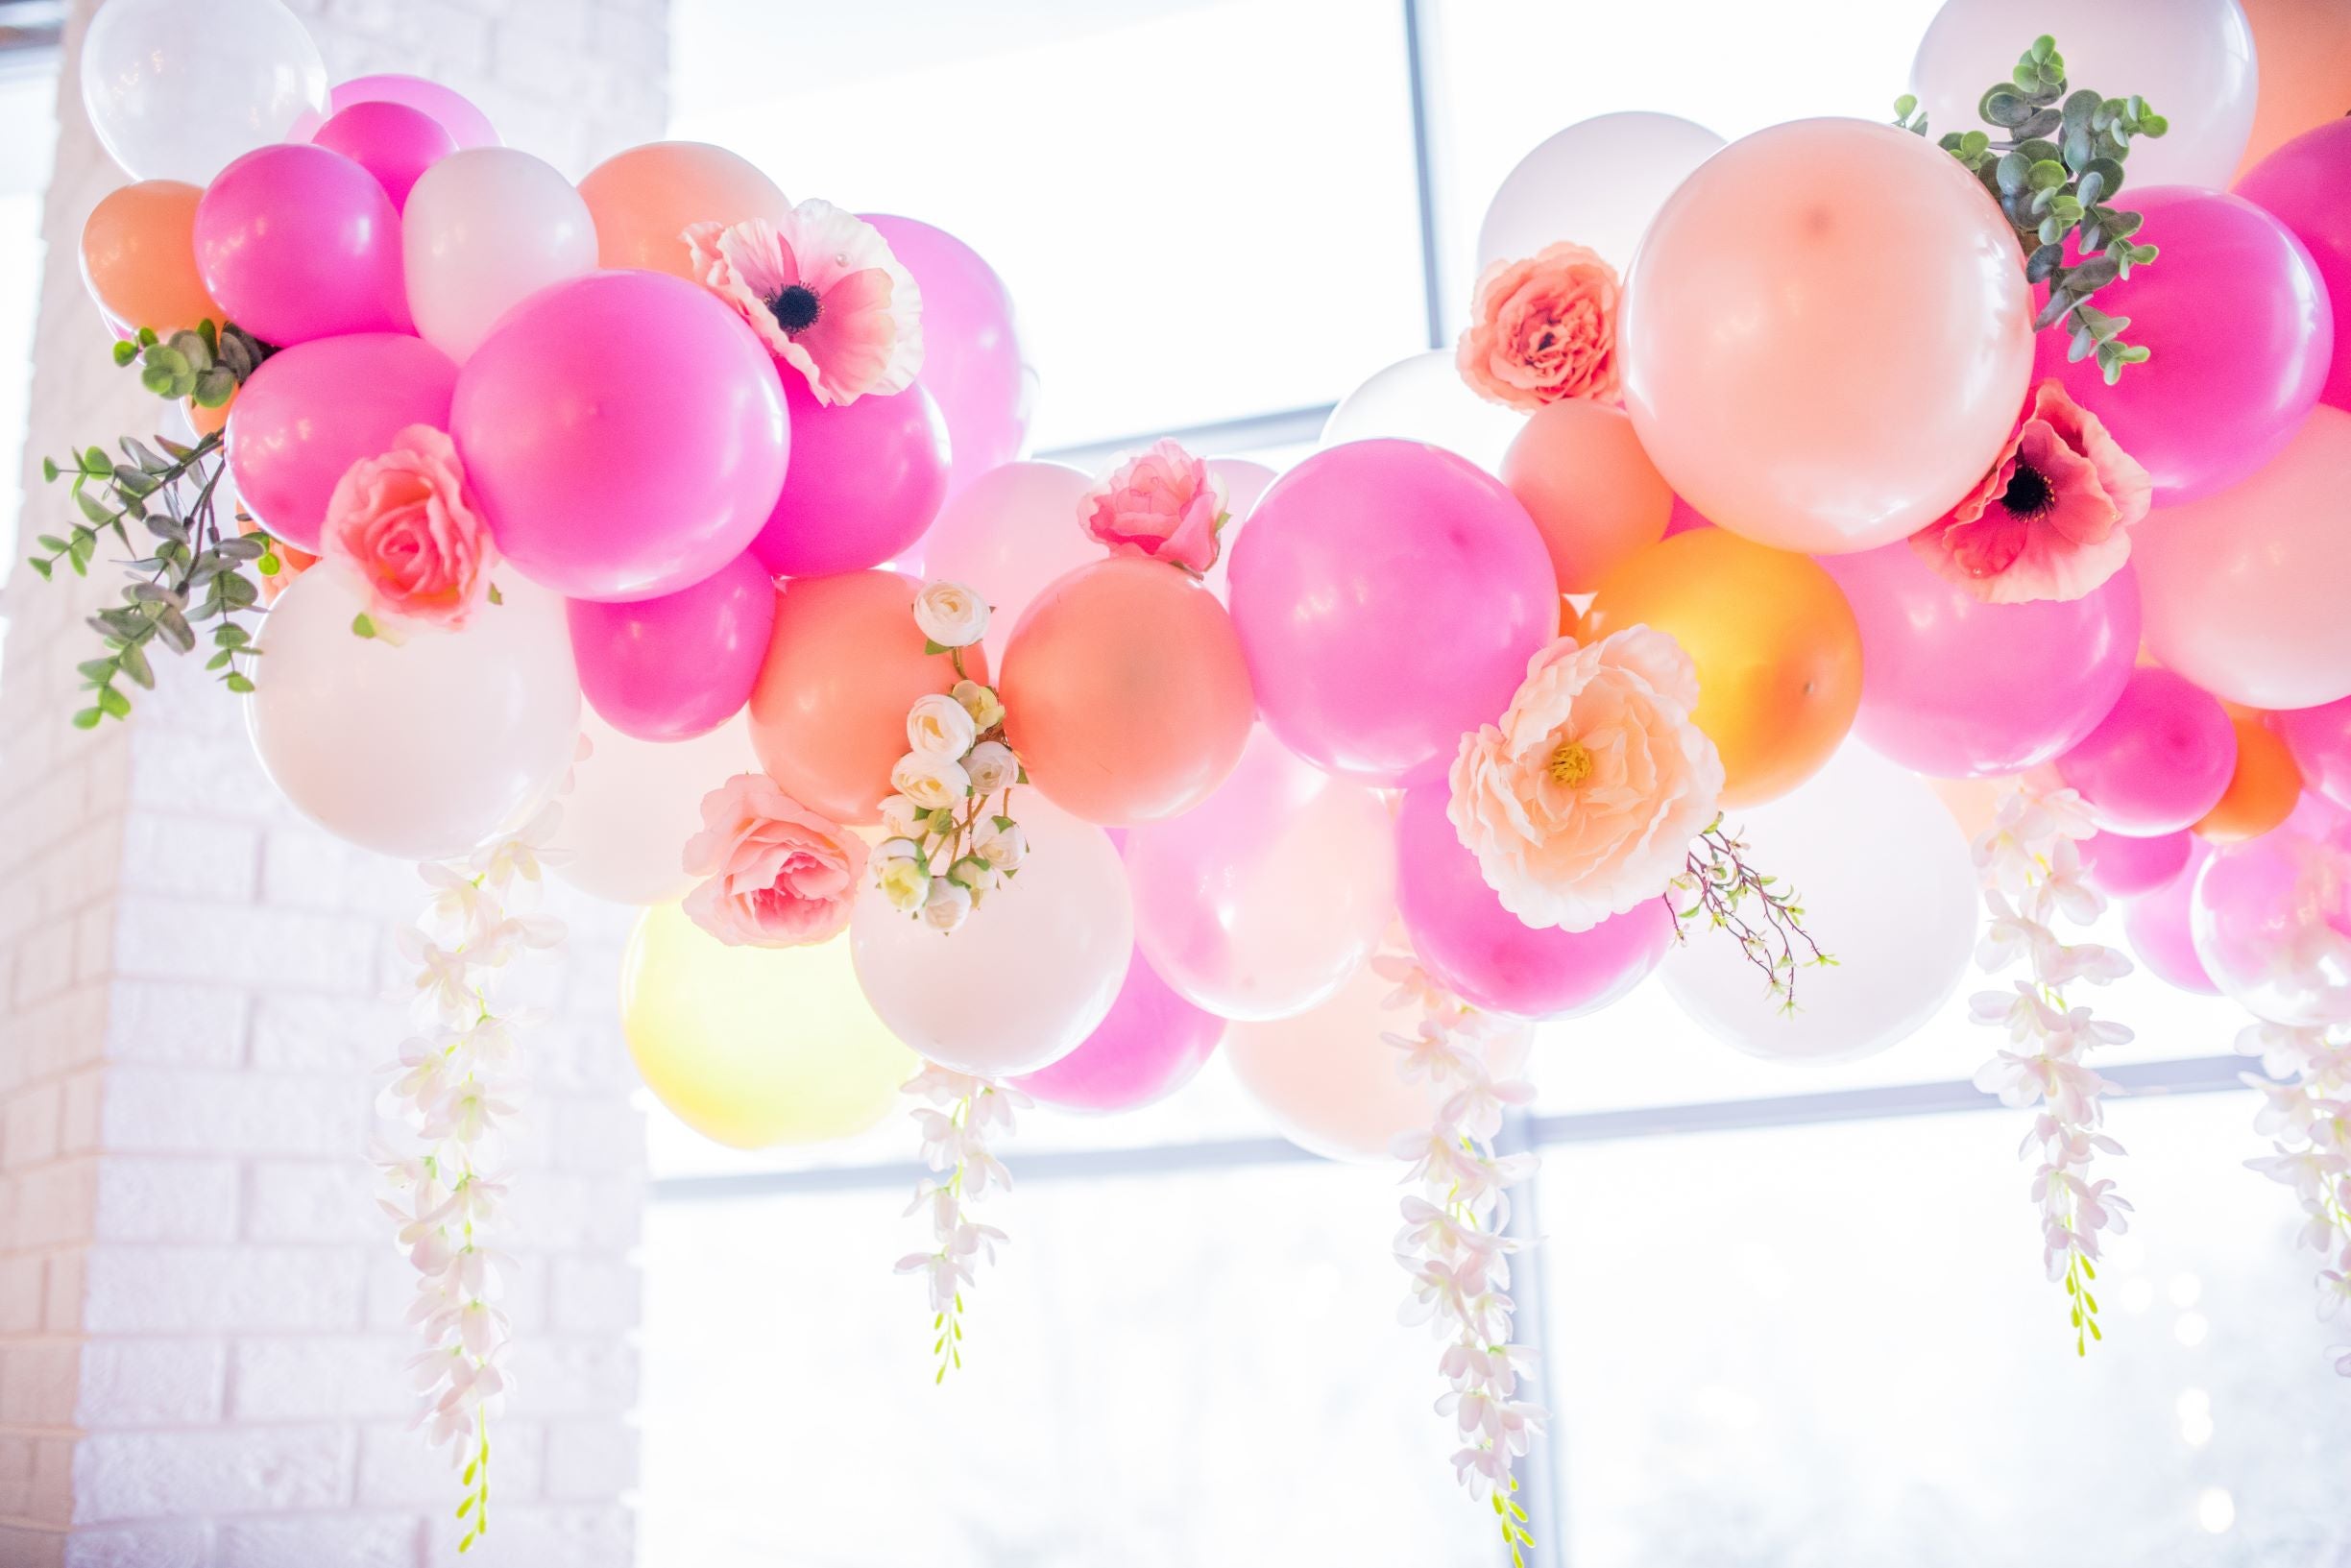 What's BEST For Balloon Garlands? 260's, Fishing Line, or Tying